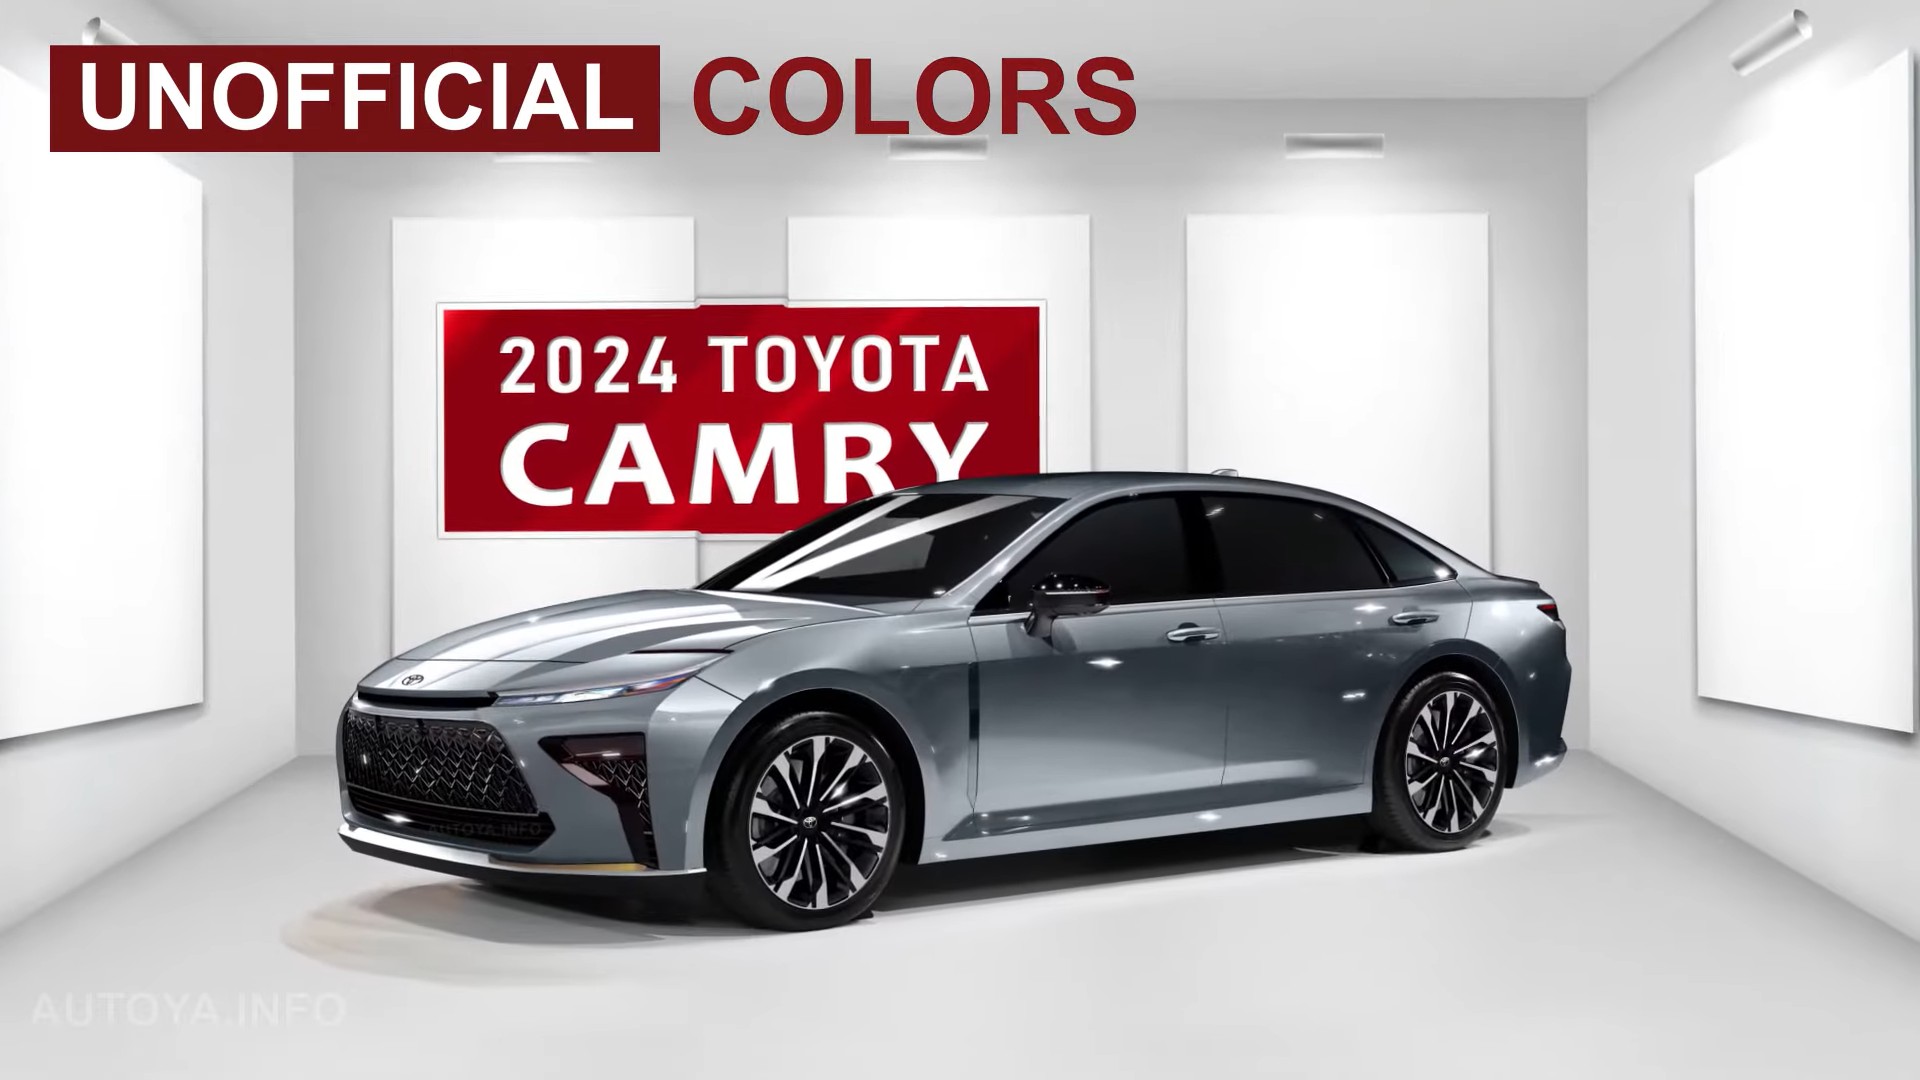 2024 Toyota Camry Ix Informally Presents All The Colorful New Generation Goodies 202724 1 